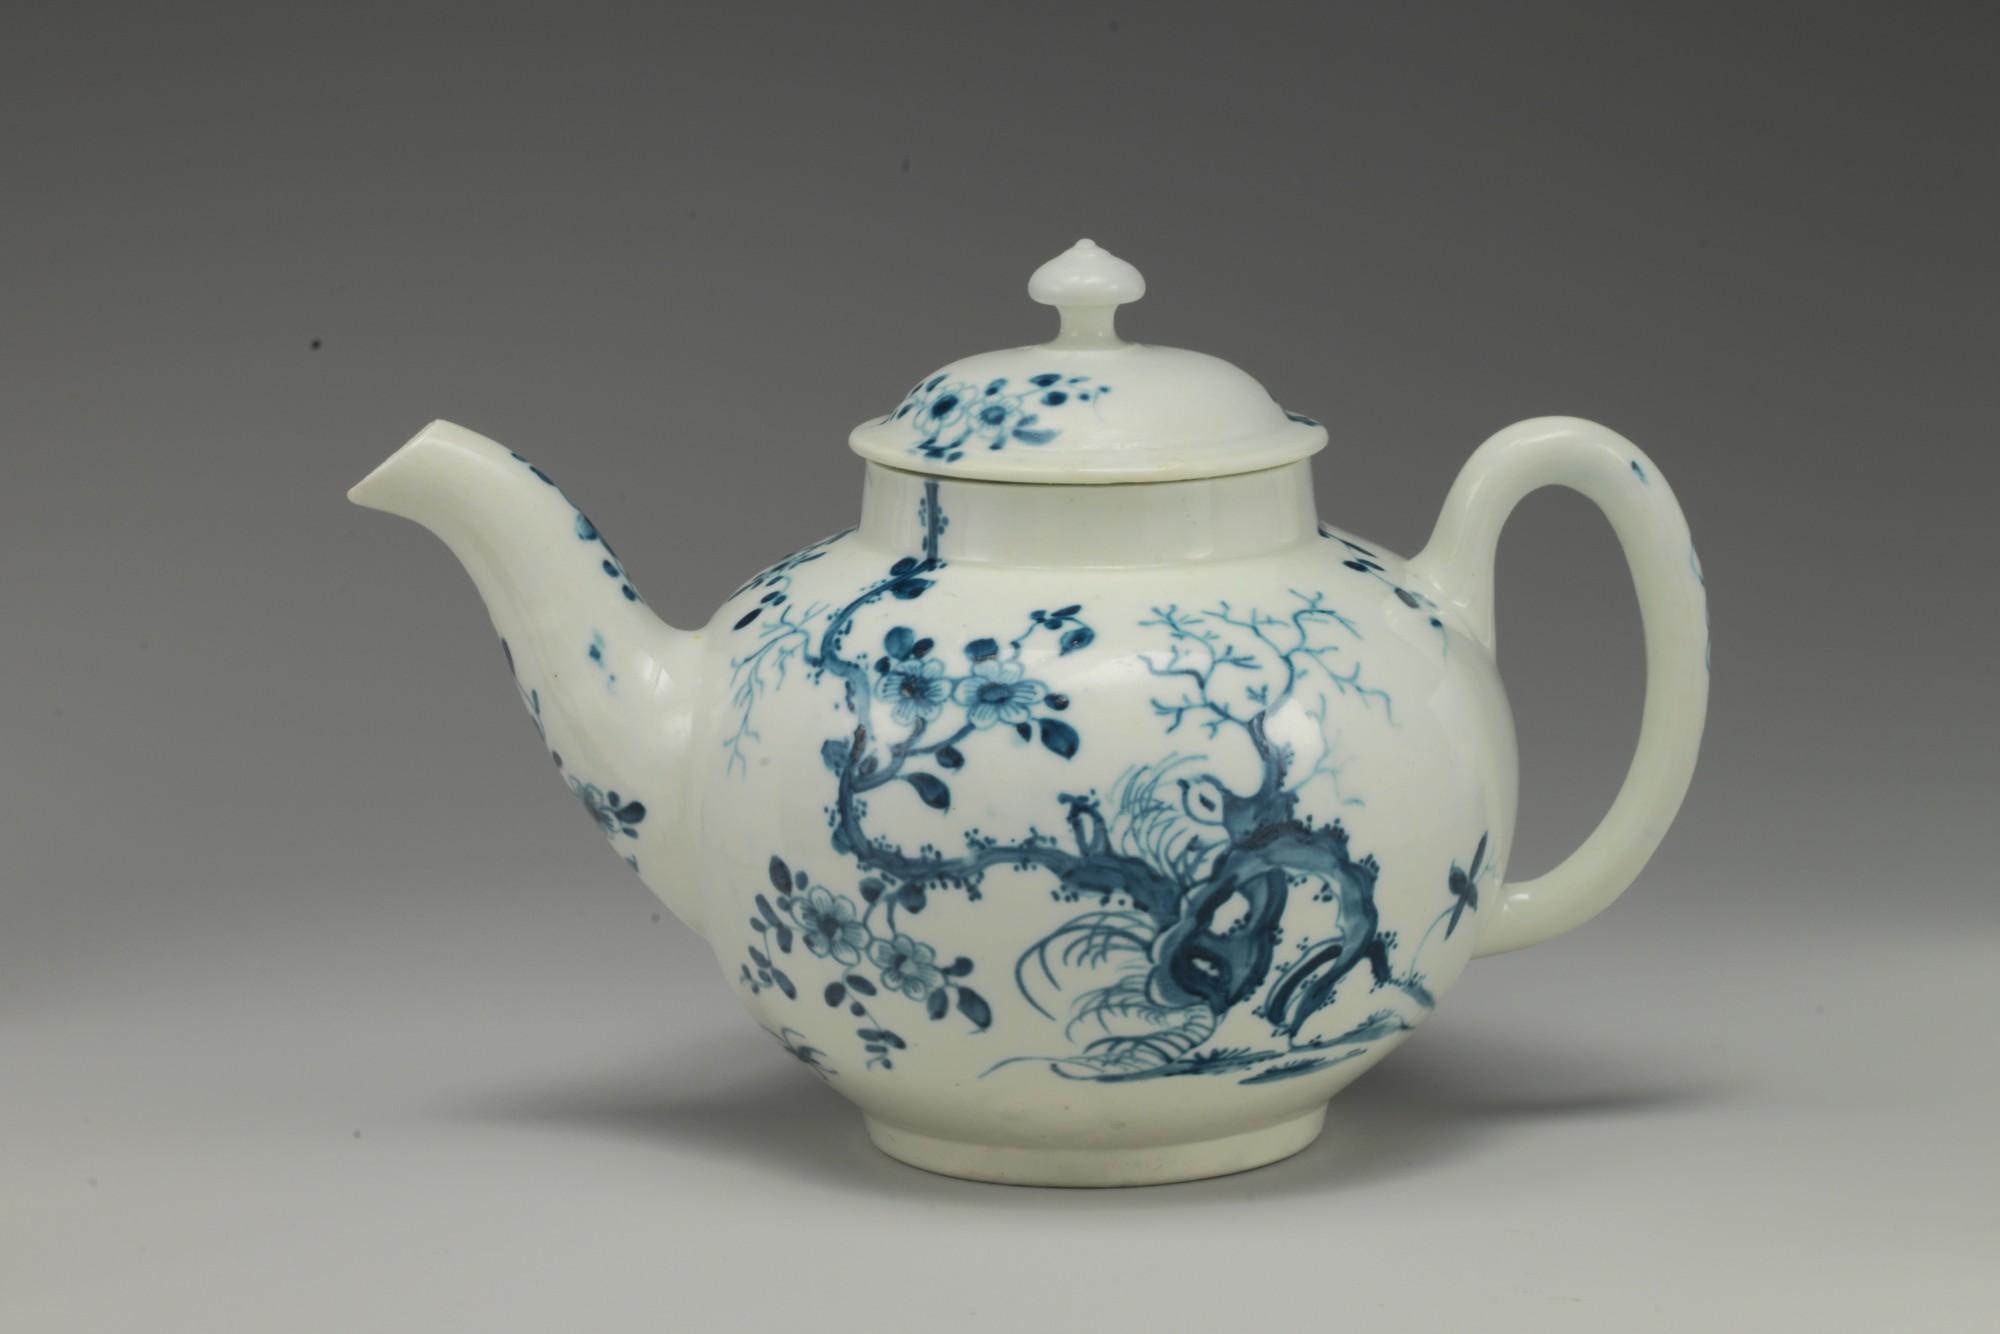 Worcester factory (British, 1751–2008), Teapot, ca. 1770. Soft-paste porcelain in blue and white.